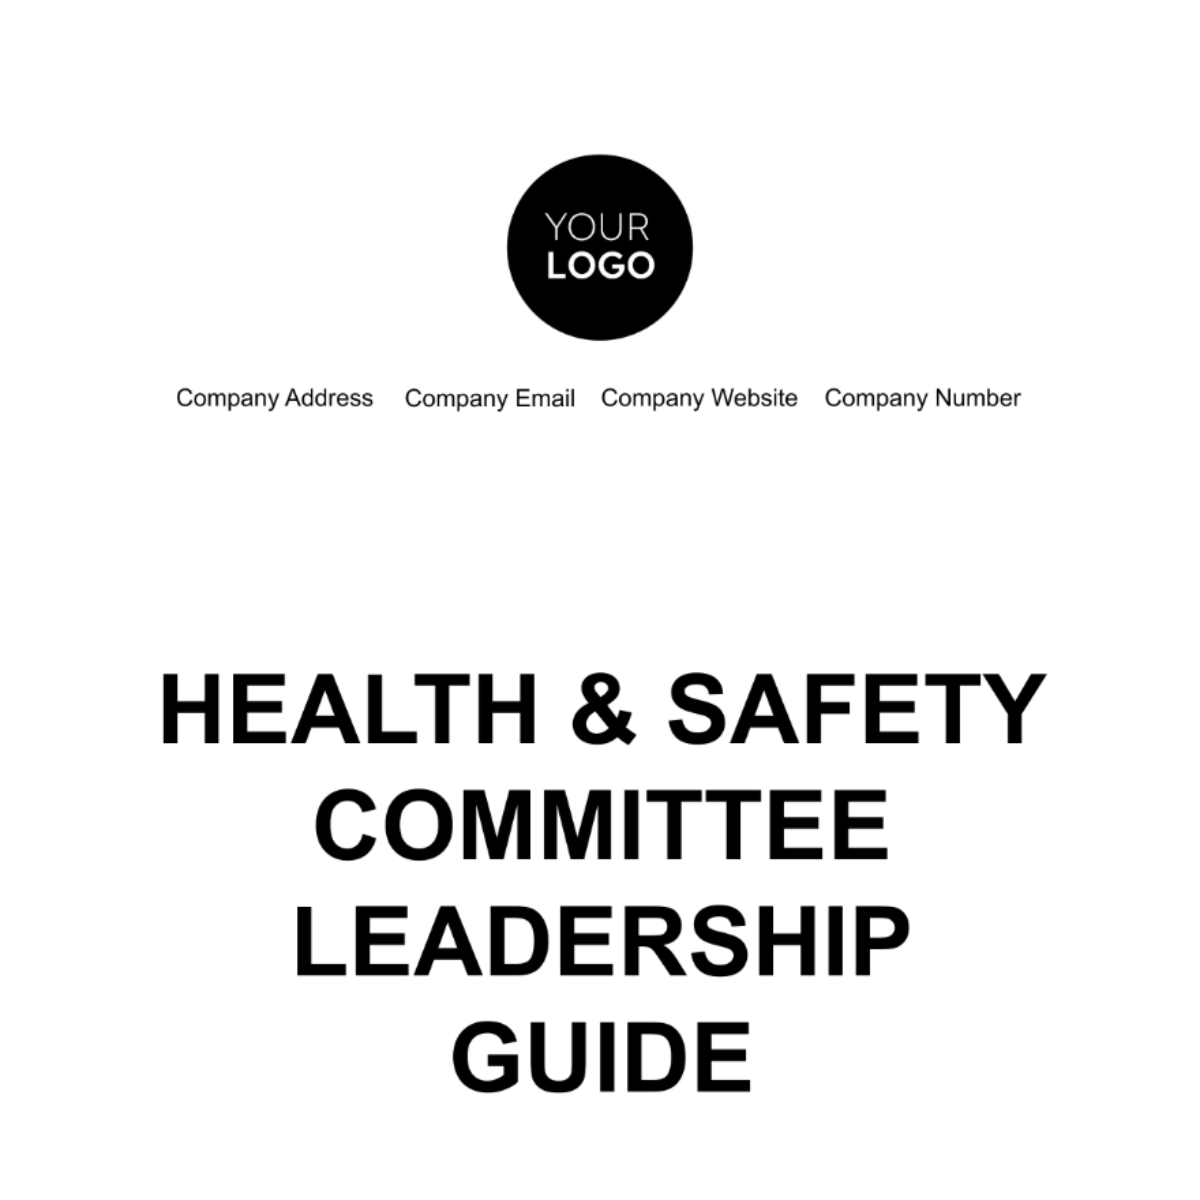 Free Health & Safety Committee Leadership Guide Template